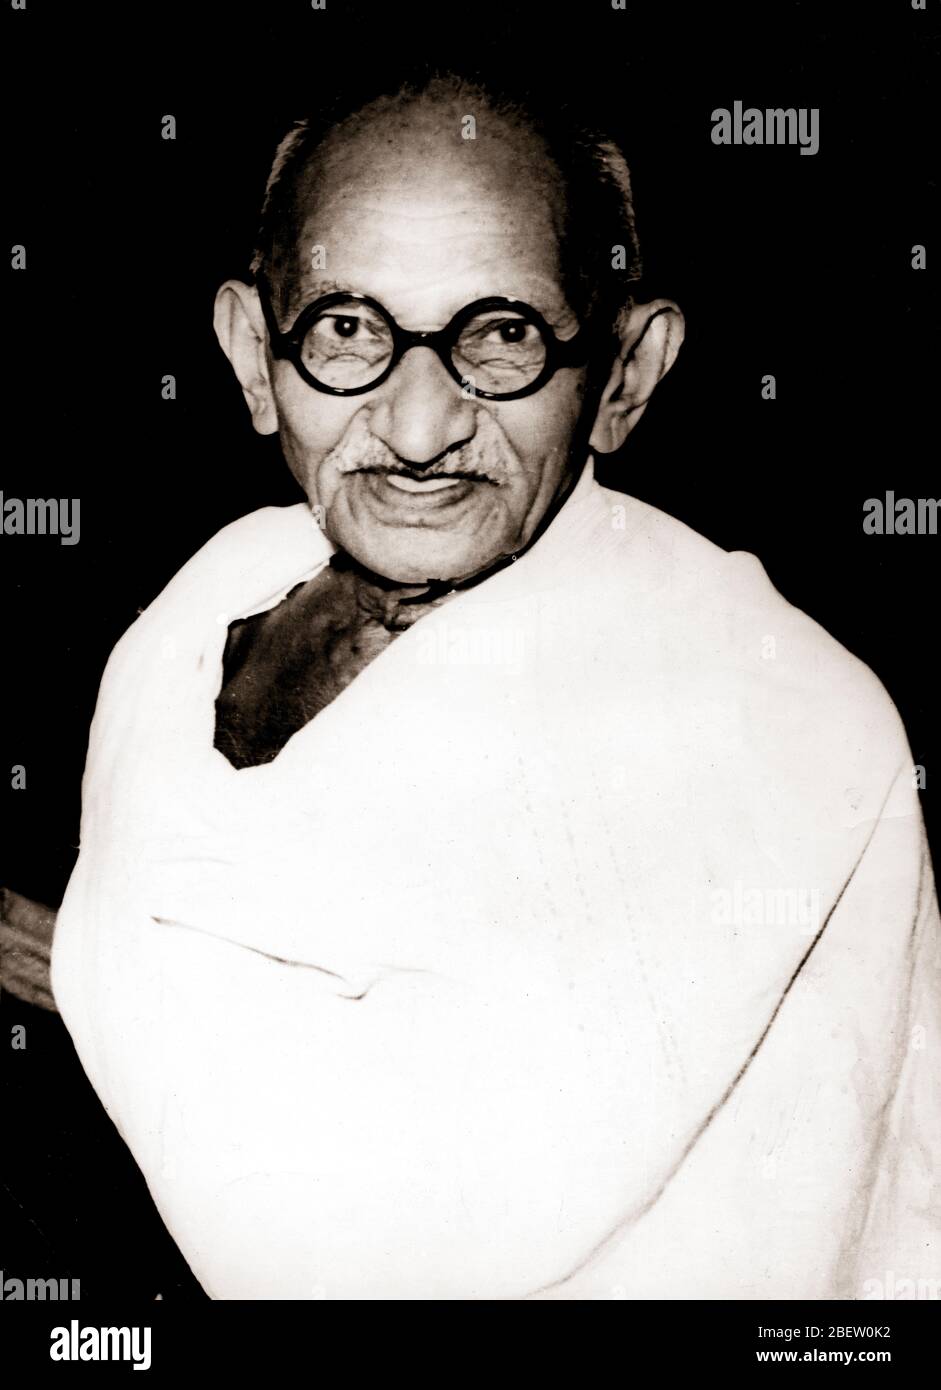 Mahatma Gandhi. Mohandas Karamchand Gandhi  2 October 1869 – 30 January 1948 -was an Indian lawyer, anti-colonial nationalist, and political ethicist, who employed nonviolent resistance to lead the successful campaign for India's independence from British Rule. Stock Photo